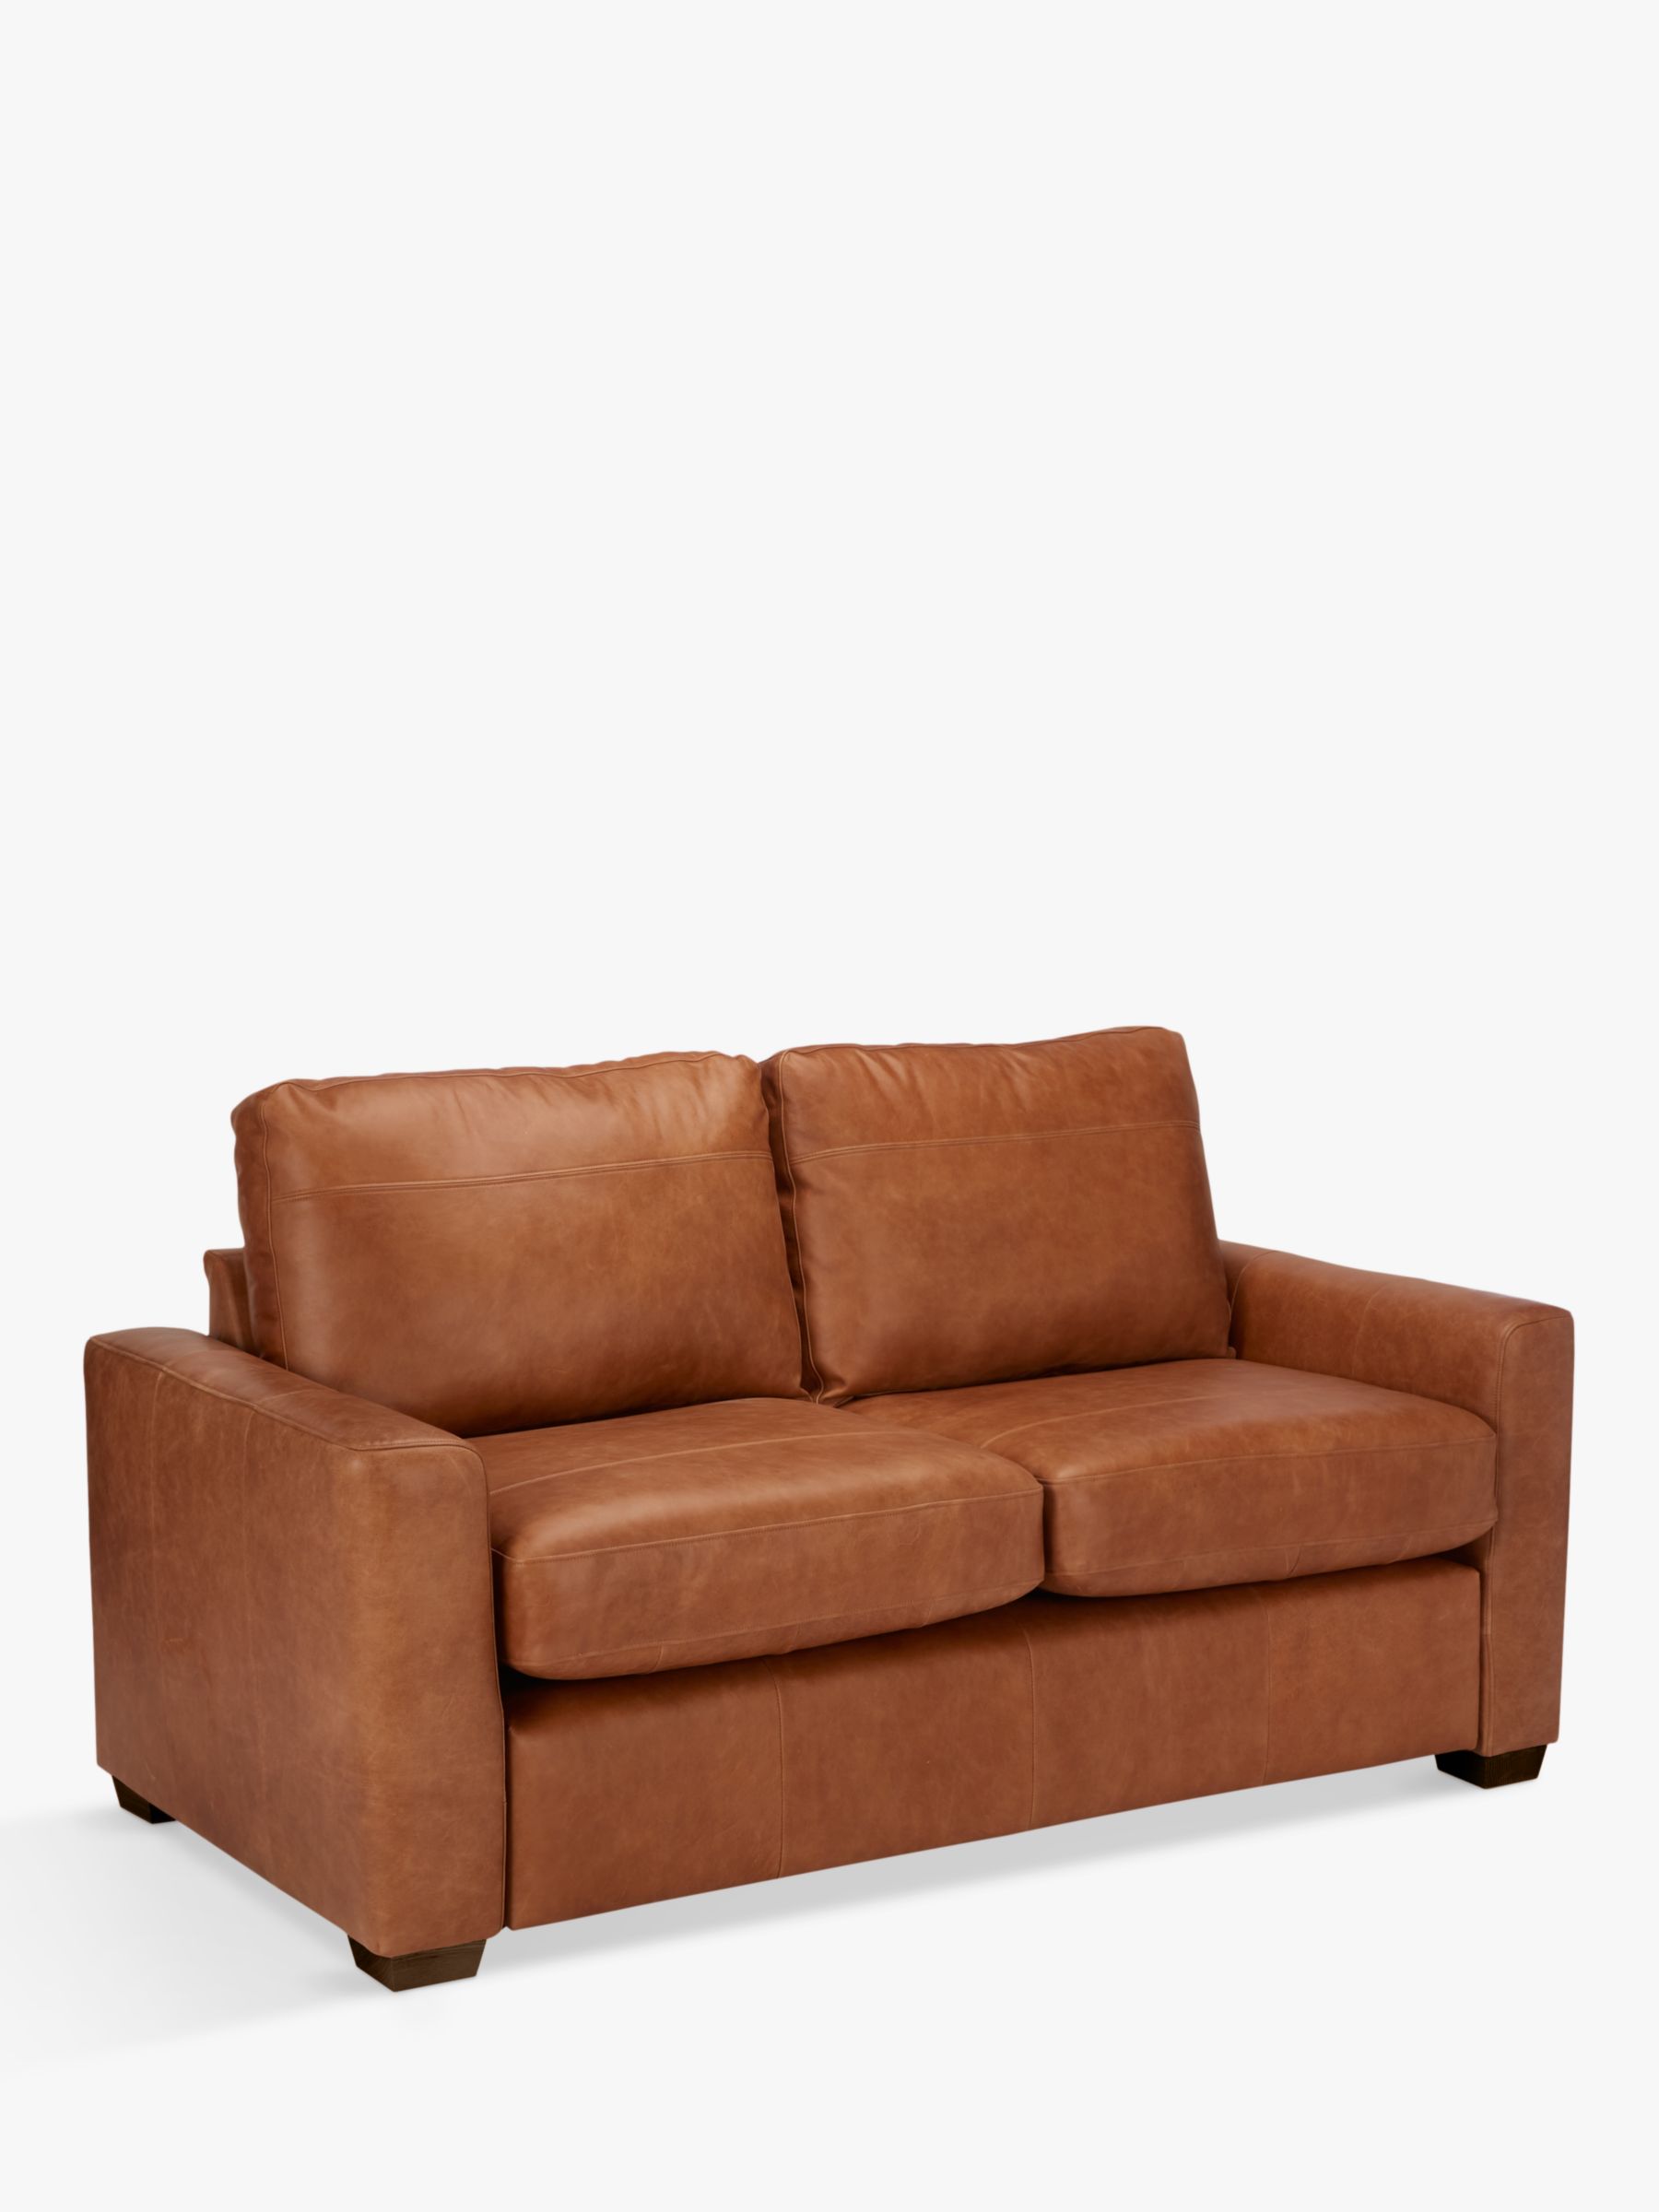 House by John Lewis Oliver Leather Small 2 Seater Sofa, Luster Cappuccino